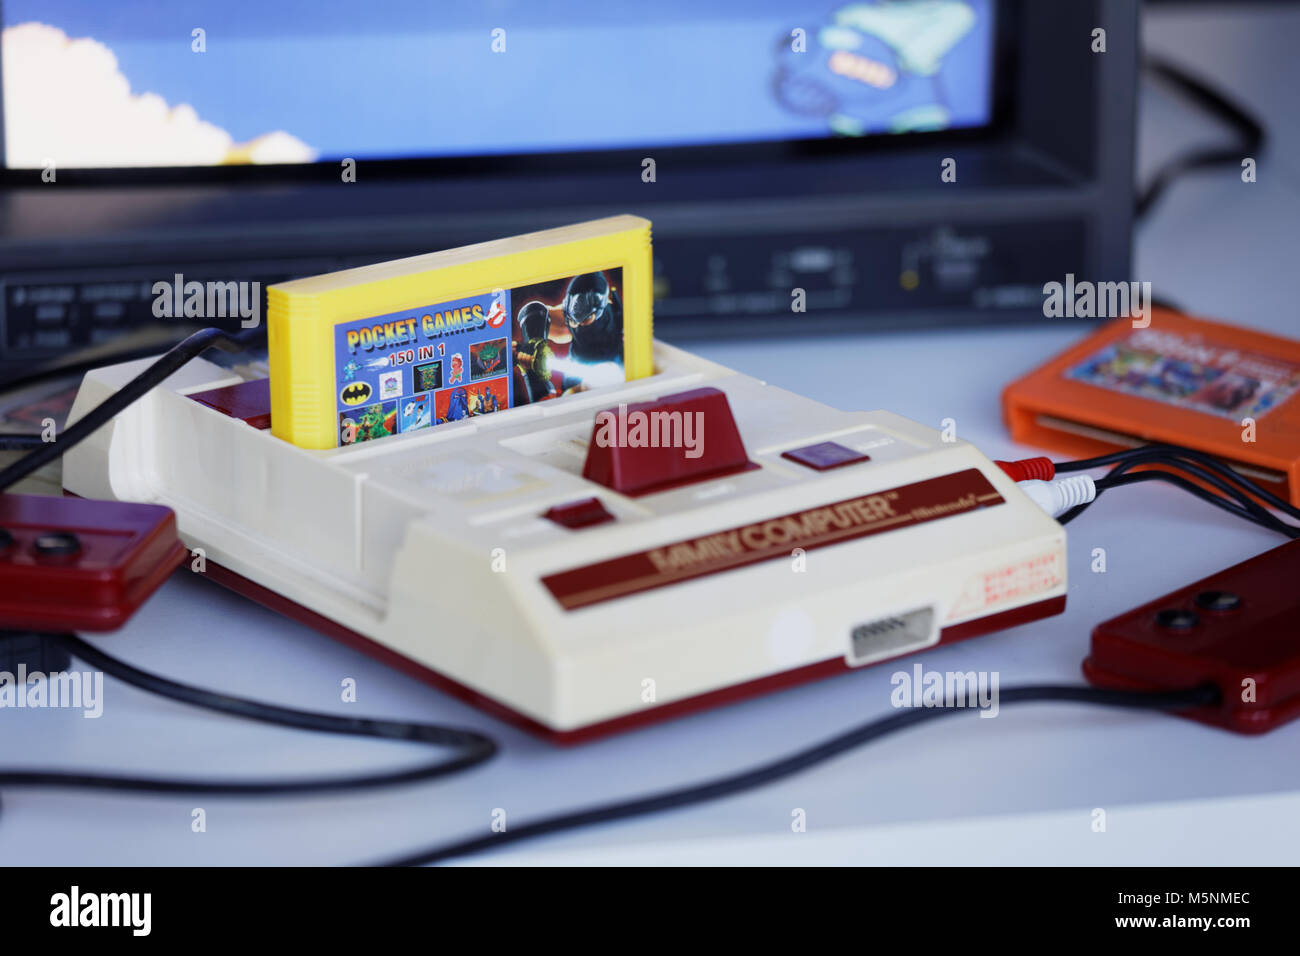 St. Petersburg, Russia - February 22, 2018: Retro video game console on the exhibition of retro computers during St. Petersburg Cyber-Sport Festival.  Stock Photo